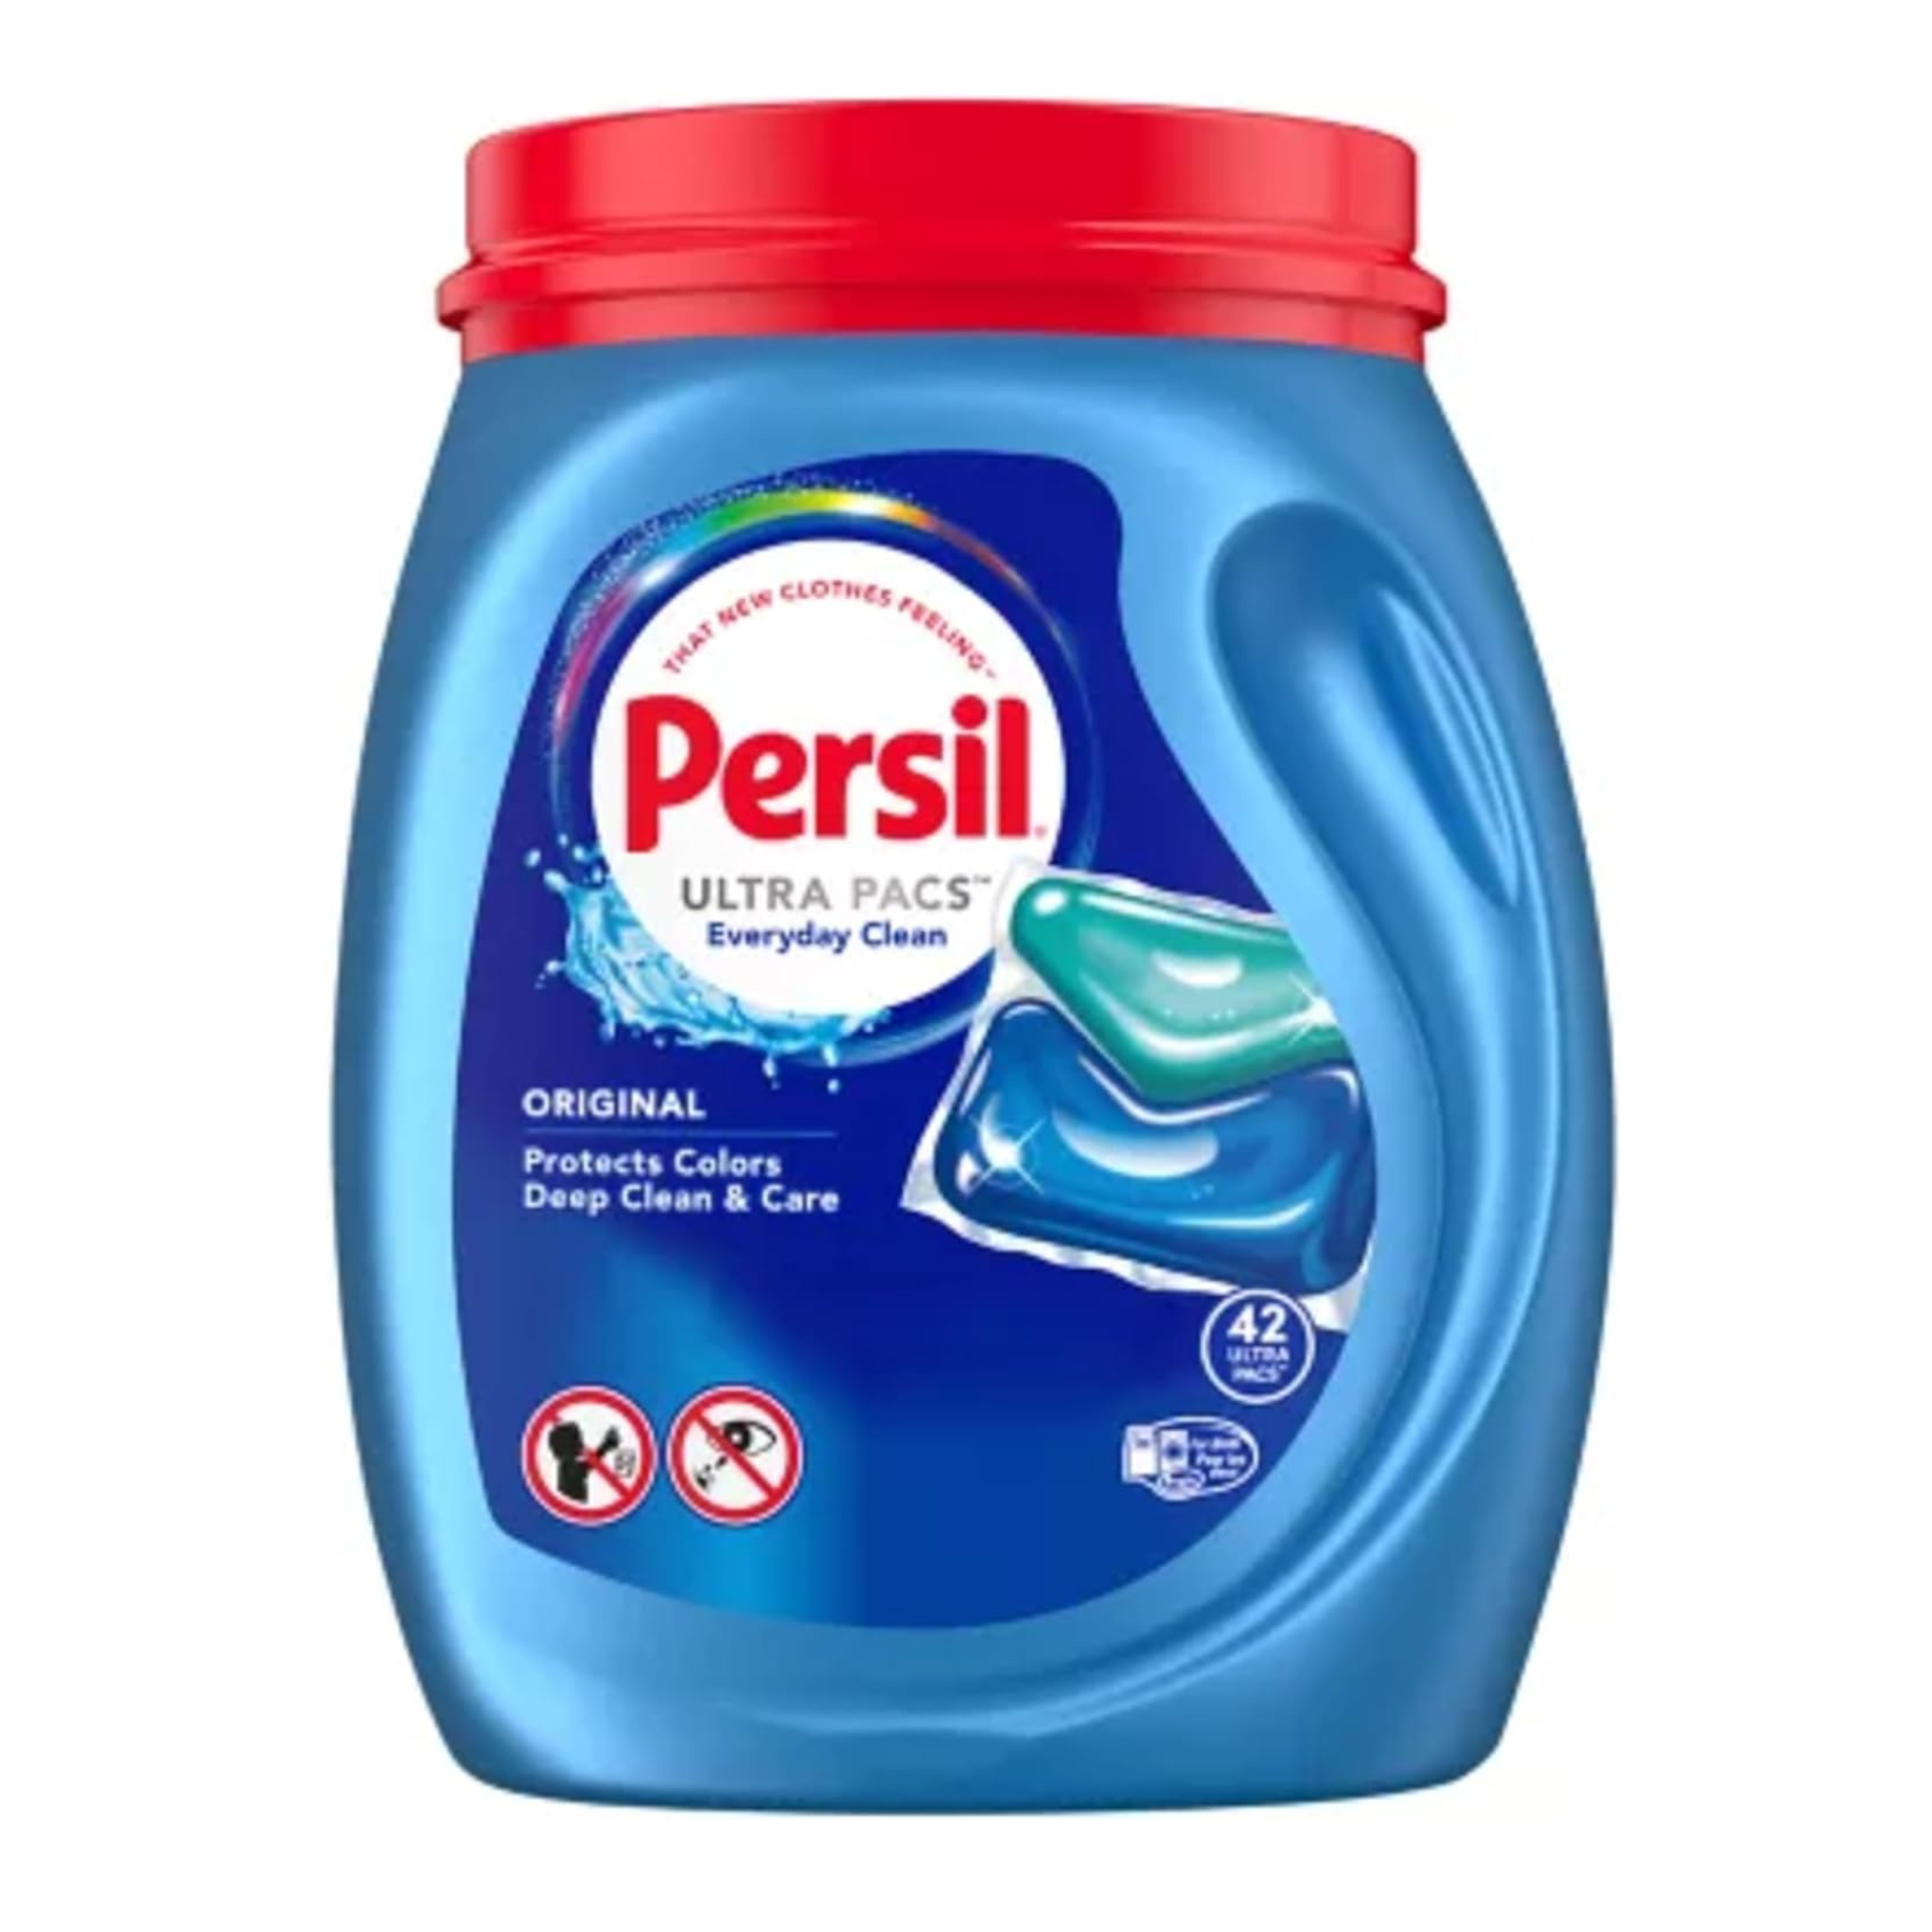 42 Persil Ultra Pacs Original Everyday Clean Laundry Detergent